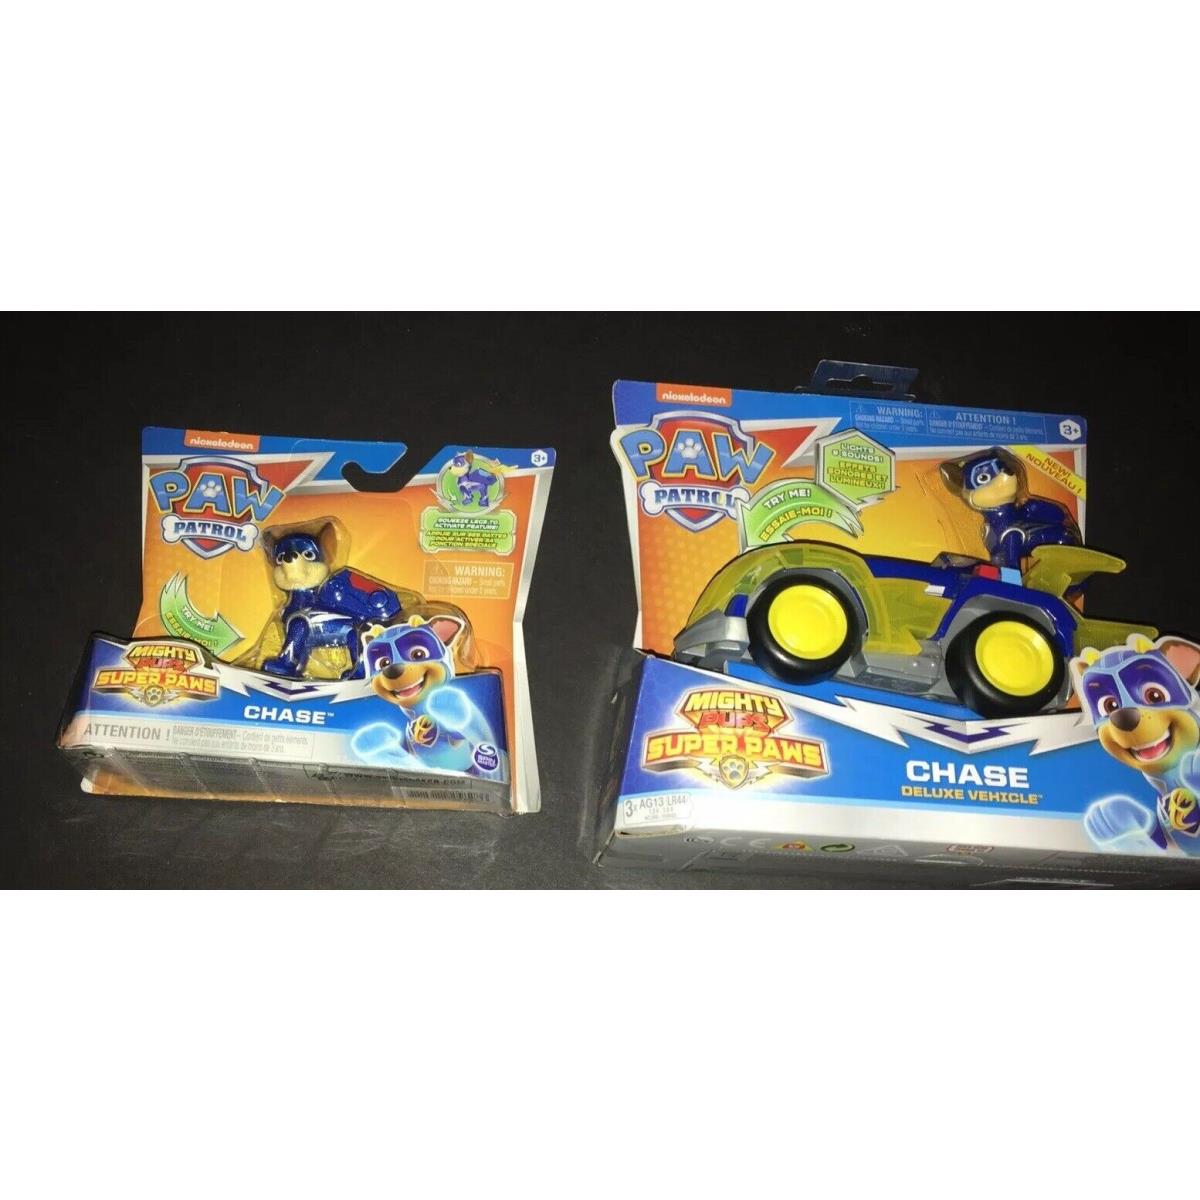 Paw Patrol Mighty Pups Super Paws Set Chase Figure and Chase Deluxe Vehicle